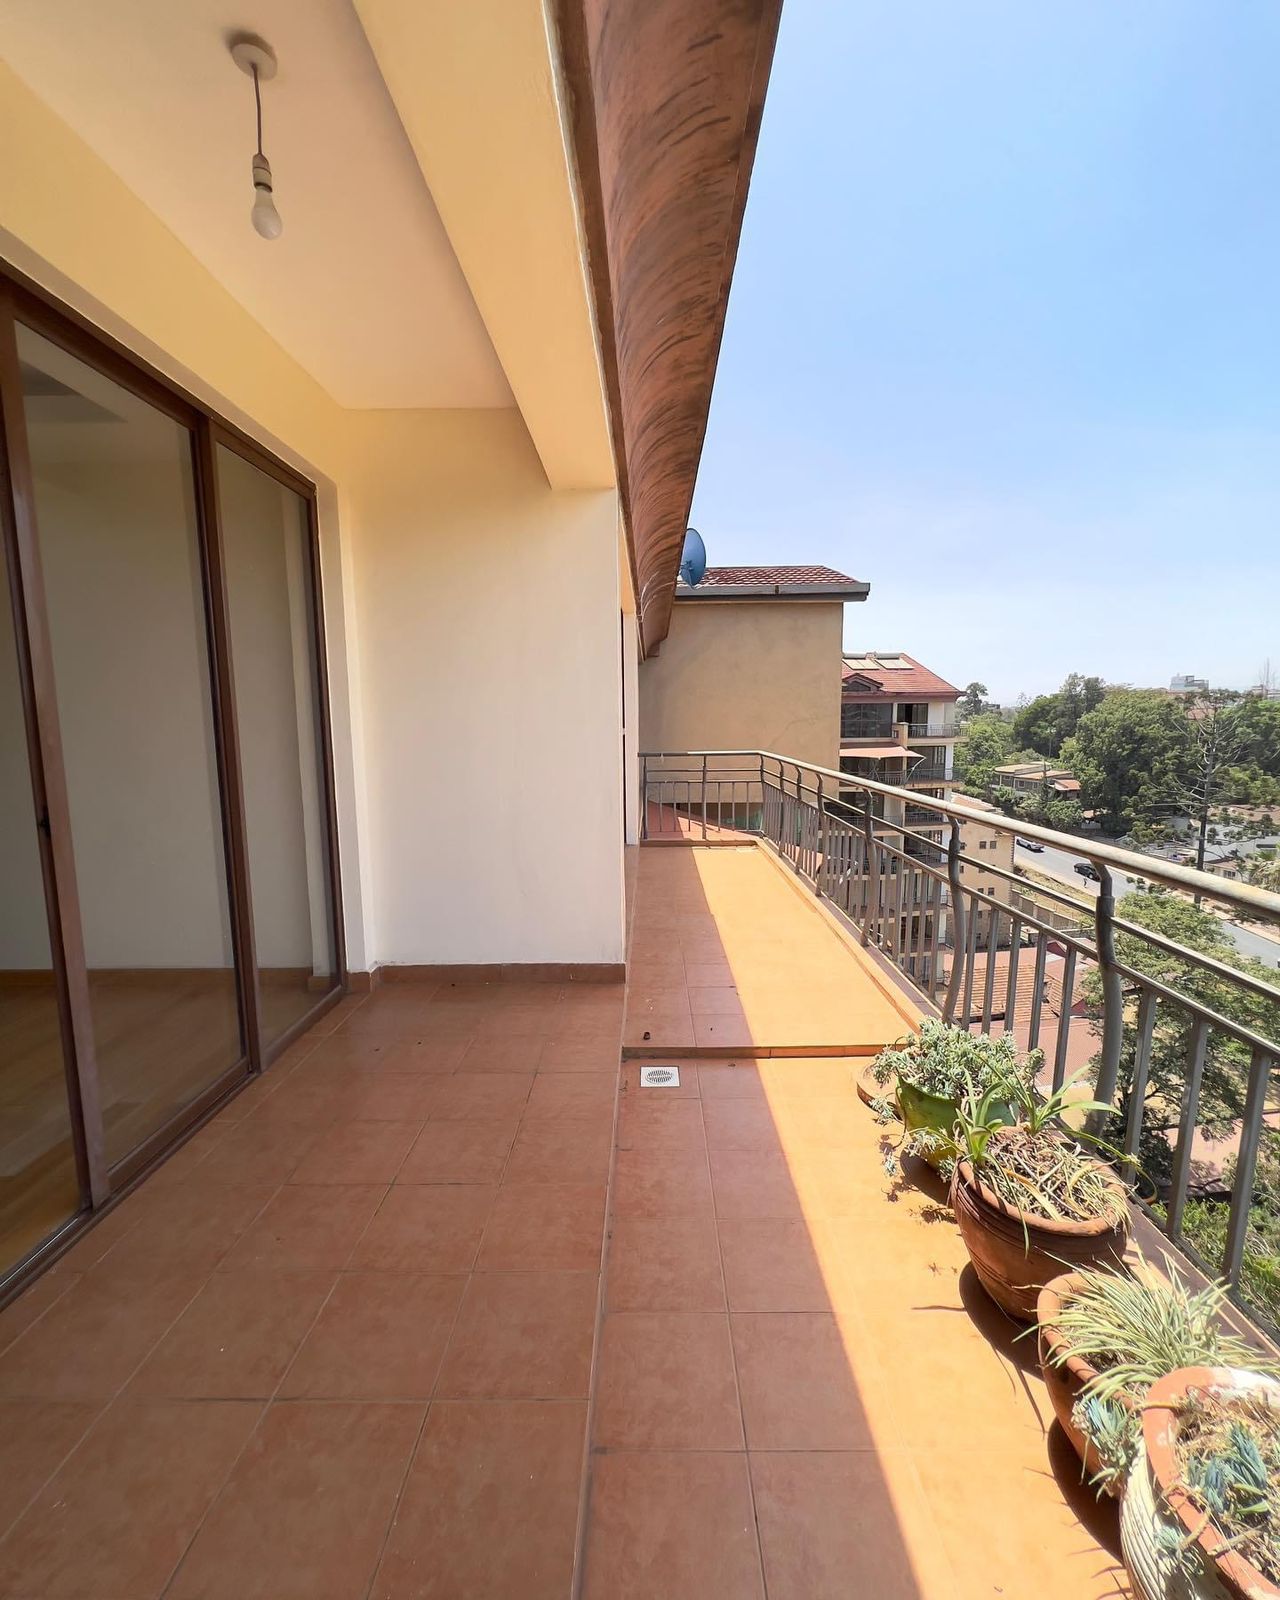 4 Bedroom Penthouse For Rent All En-suite + Sq at Kilimani,Near Junction Mall for Kshs.190,000. Musilli Homes